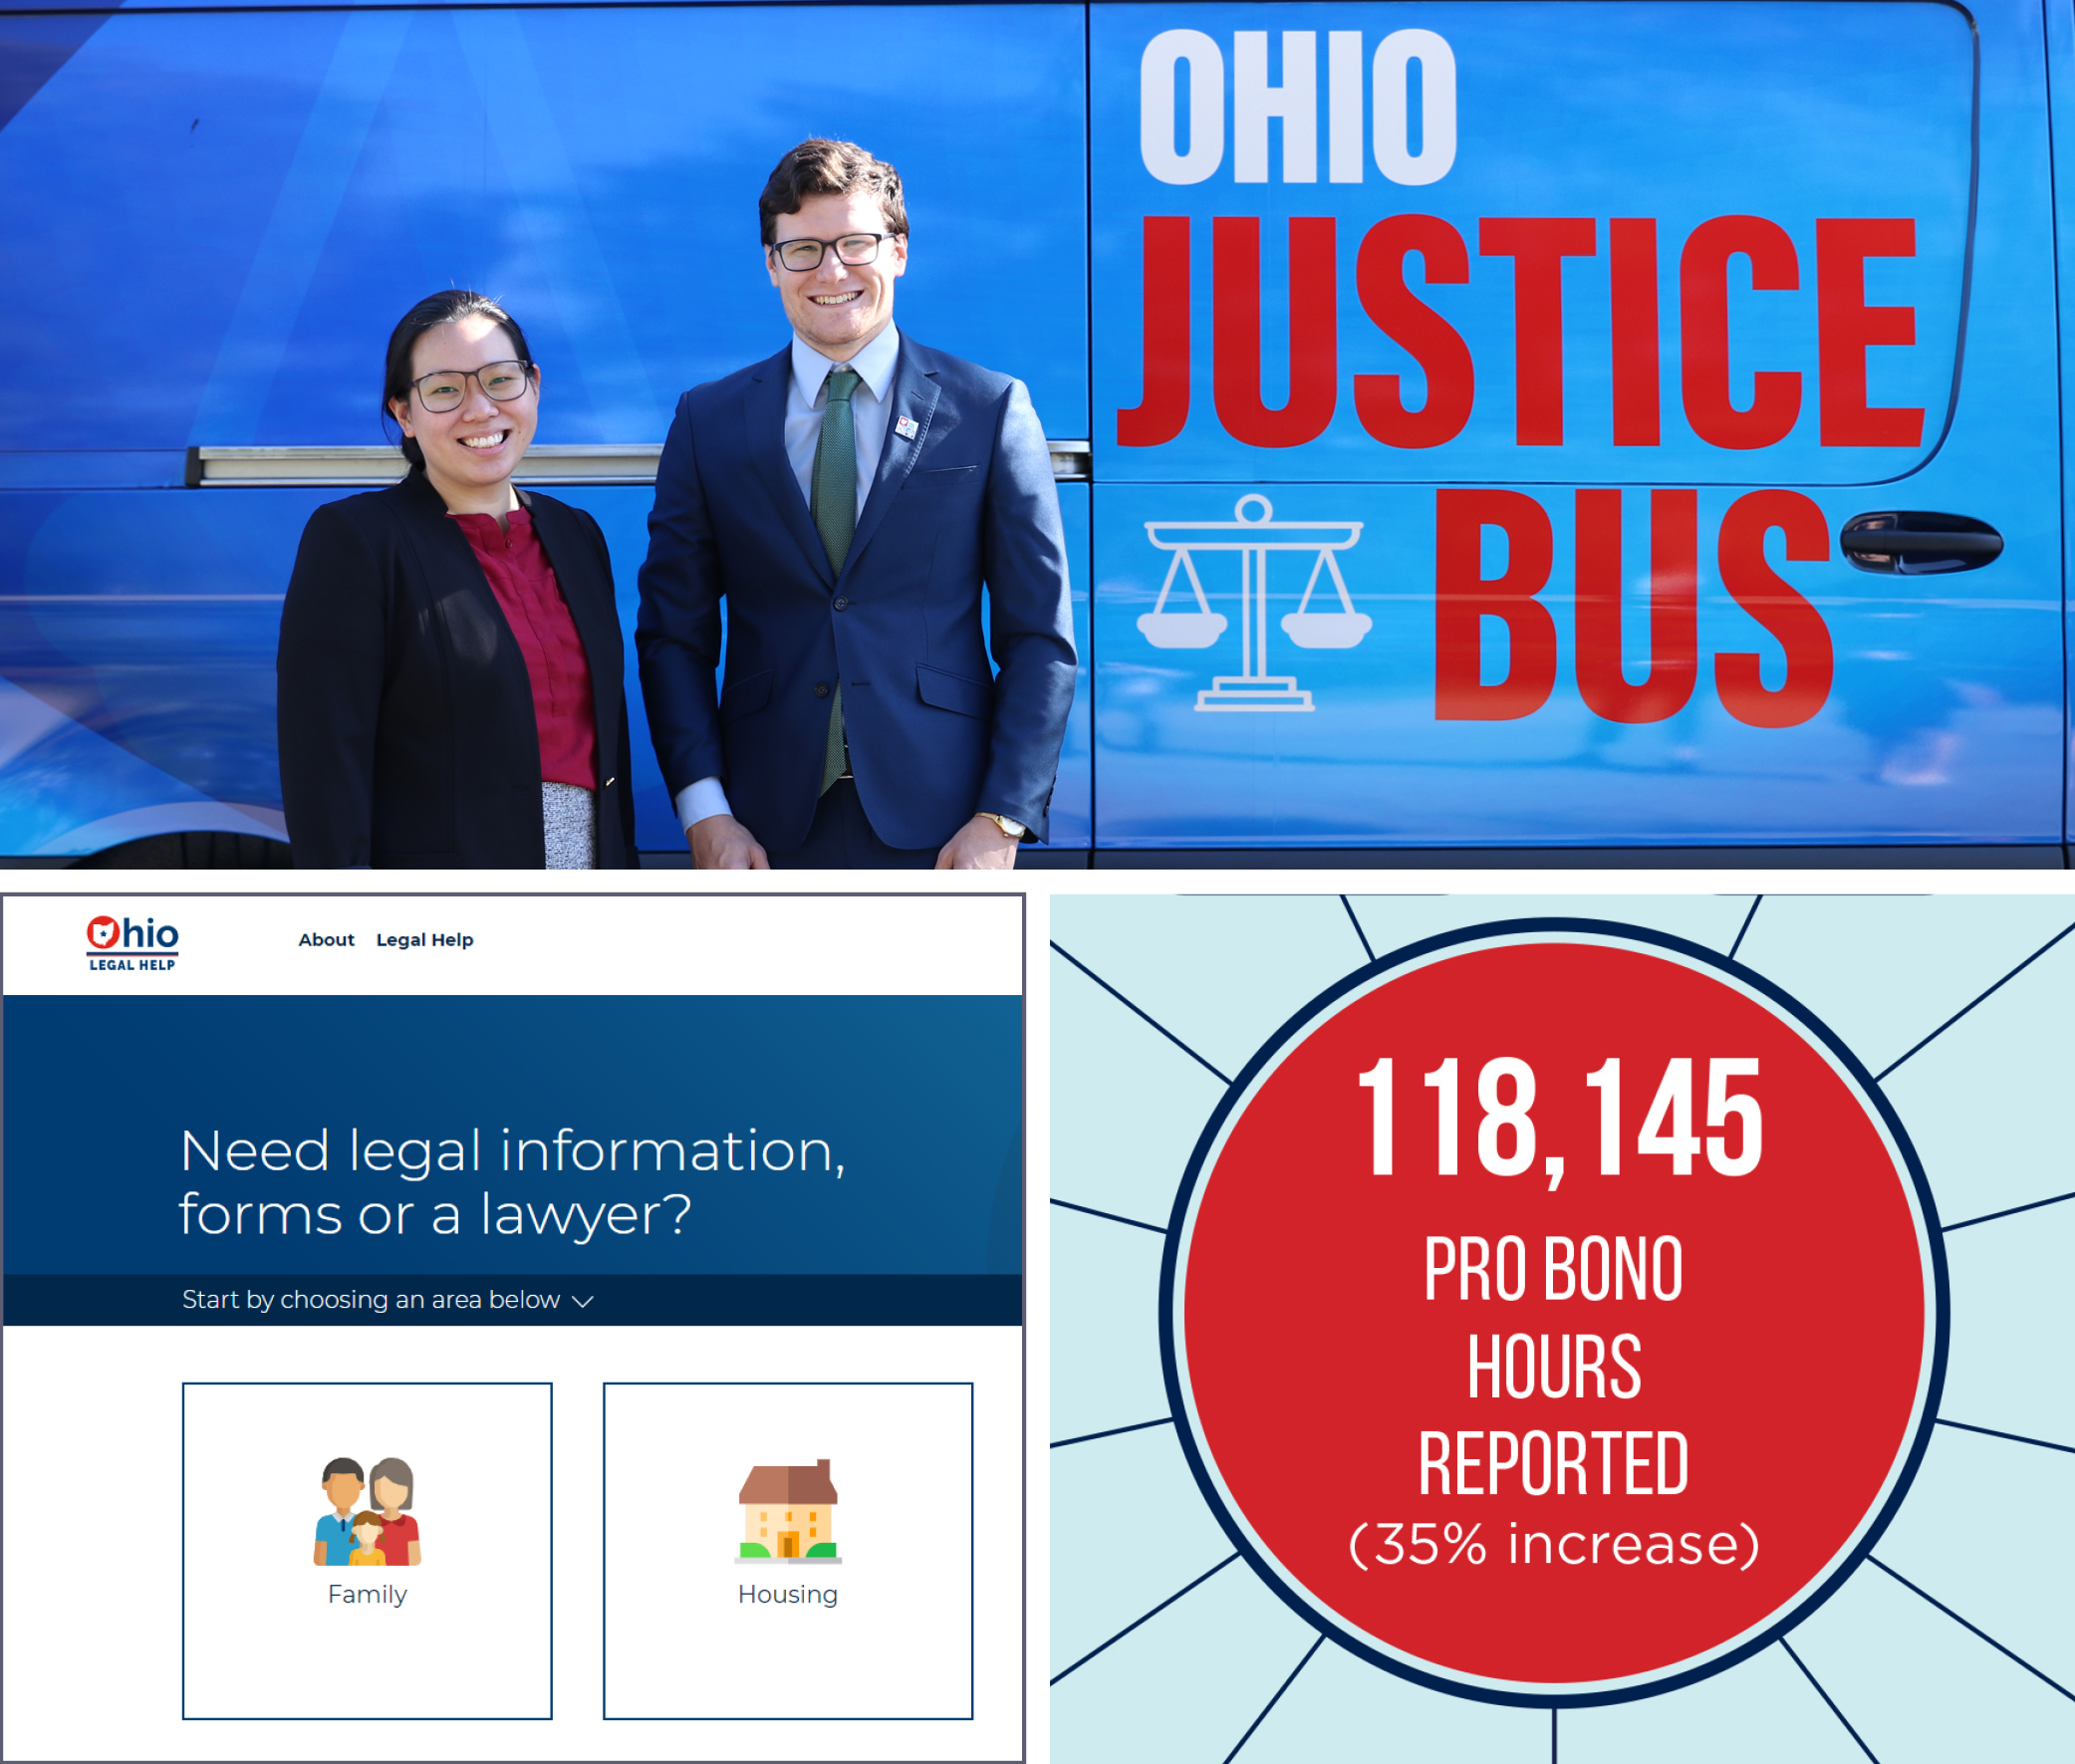 Images including (top) a woman and a man standing in front of the Ohio Justice Bus; (bottom left) a screen shot of the Ohio Legal Help website; and (bottom right) an infographic showing that Ohio attorneys are doing more pro bono work